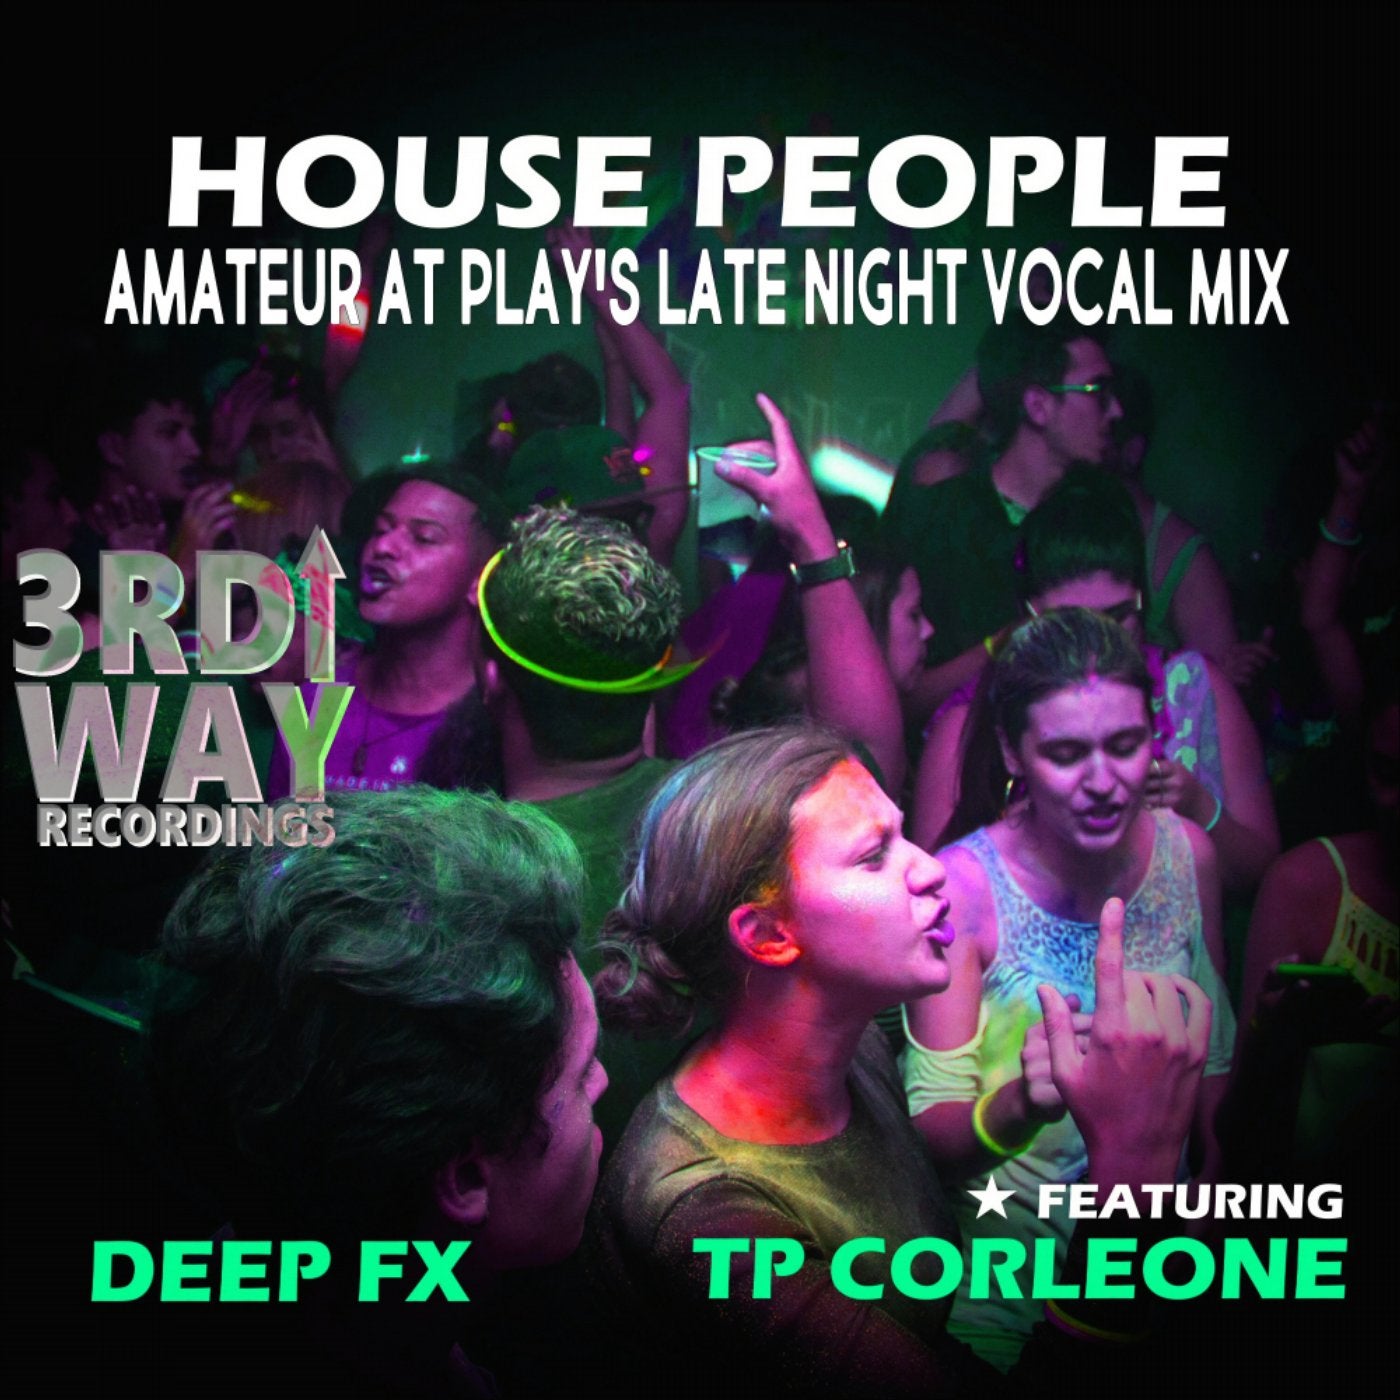 House People (Amateur At Play's Late Night Vocal Mix)